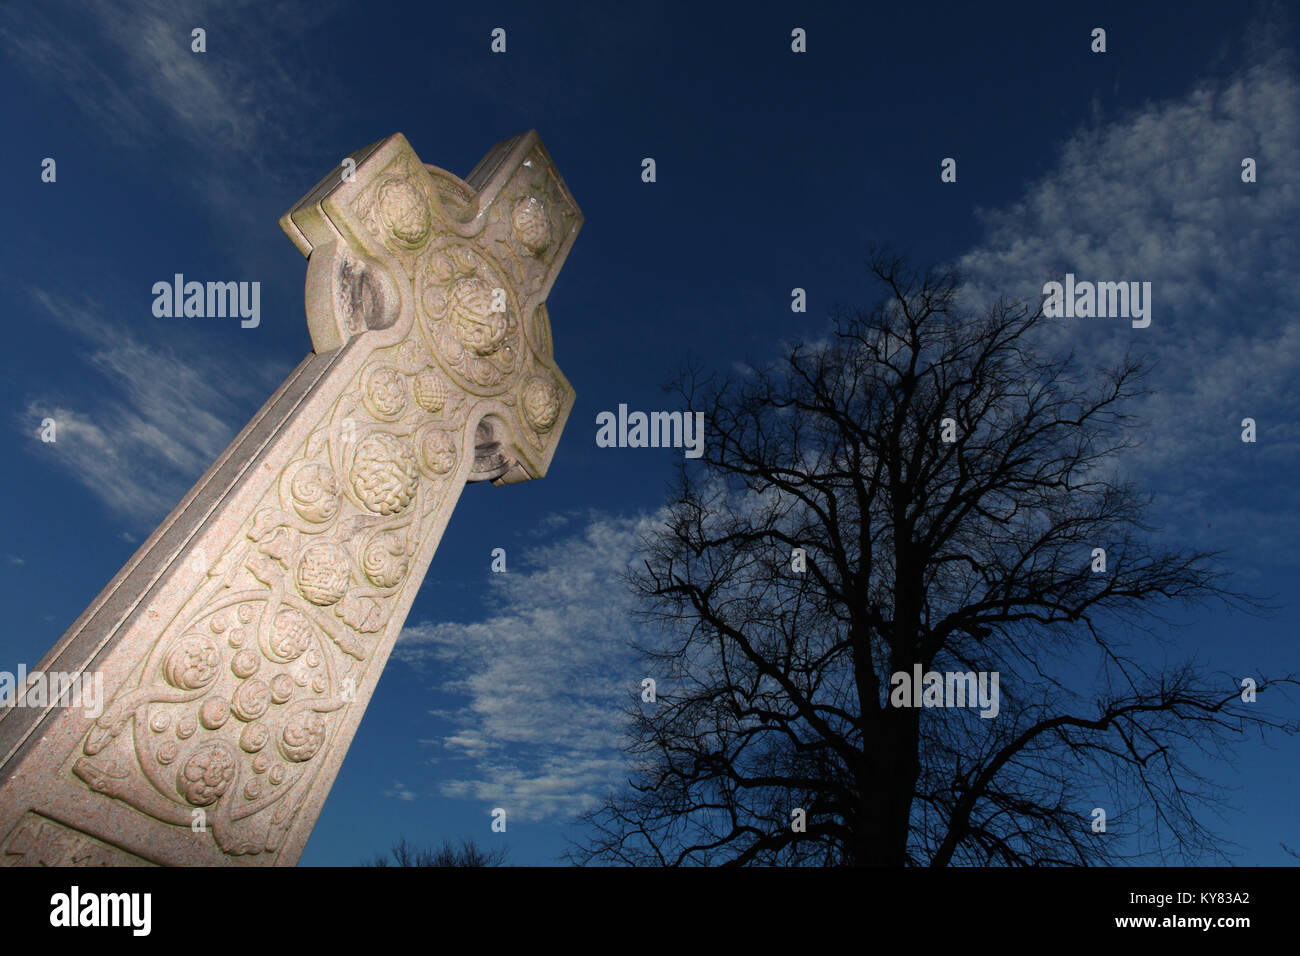 a celtic design gravestone situated in the graveyard of corstorphine old parish church set against the silhouette of a nearby tree Stock Photo